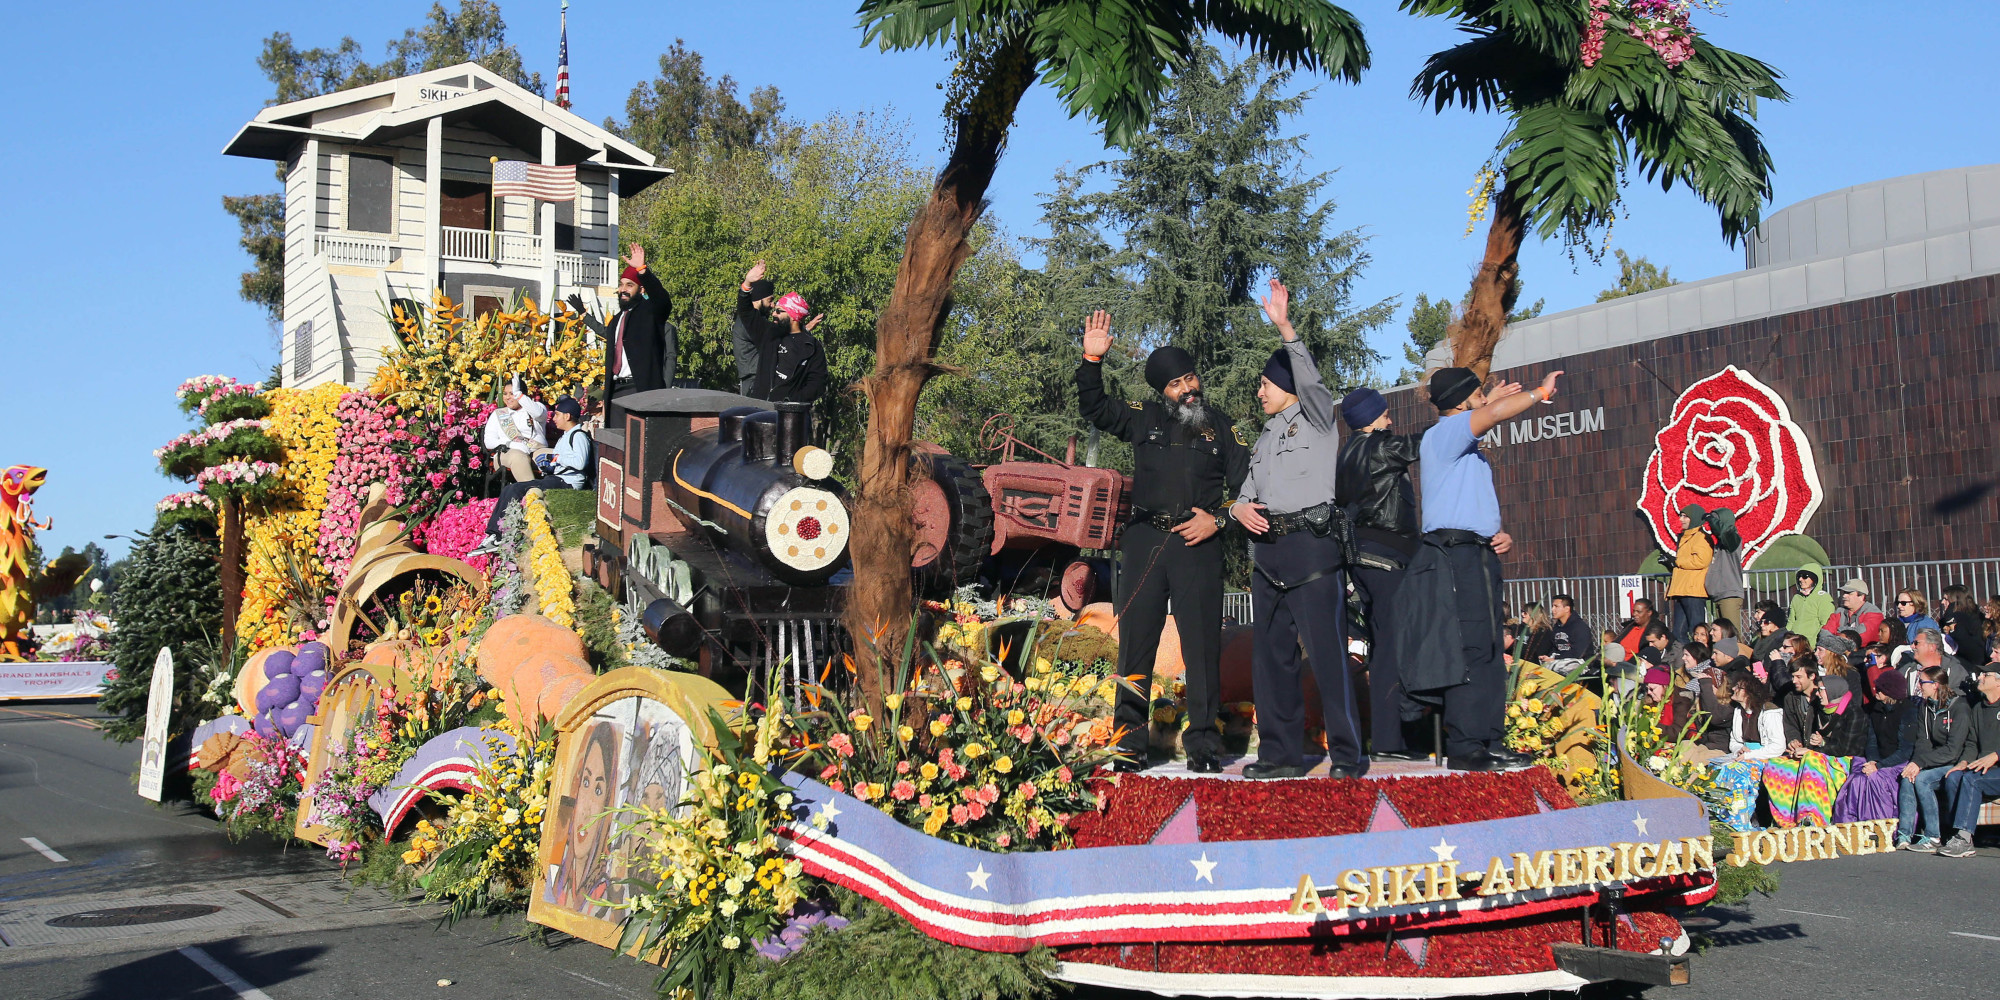 Sikh float in Rose Parade Will Highlight Faith & Service Amid Climate of Hostility